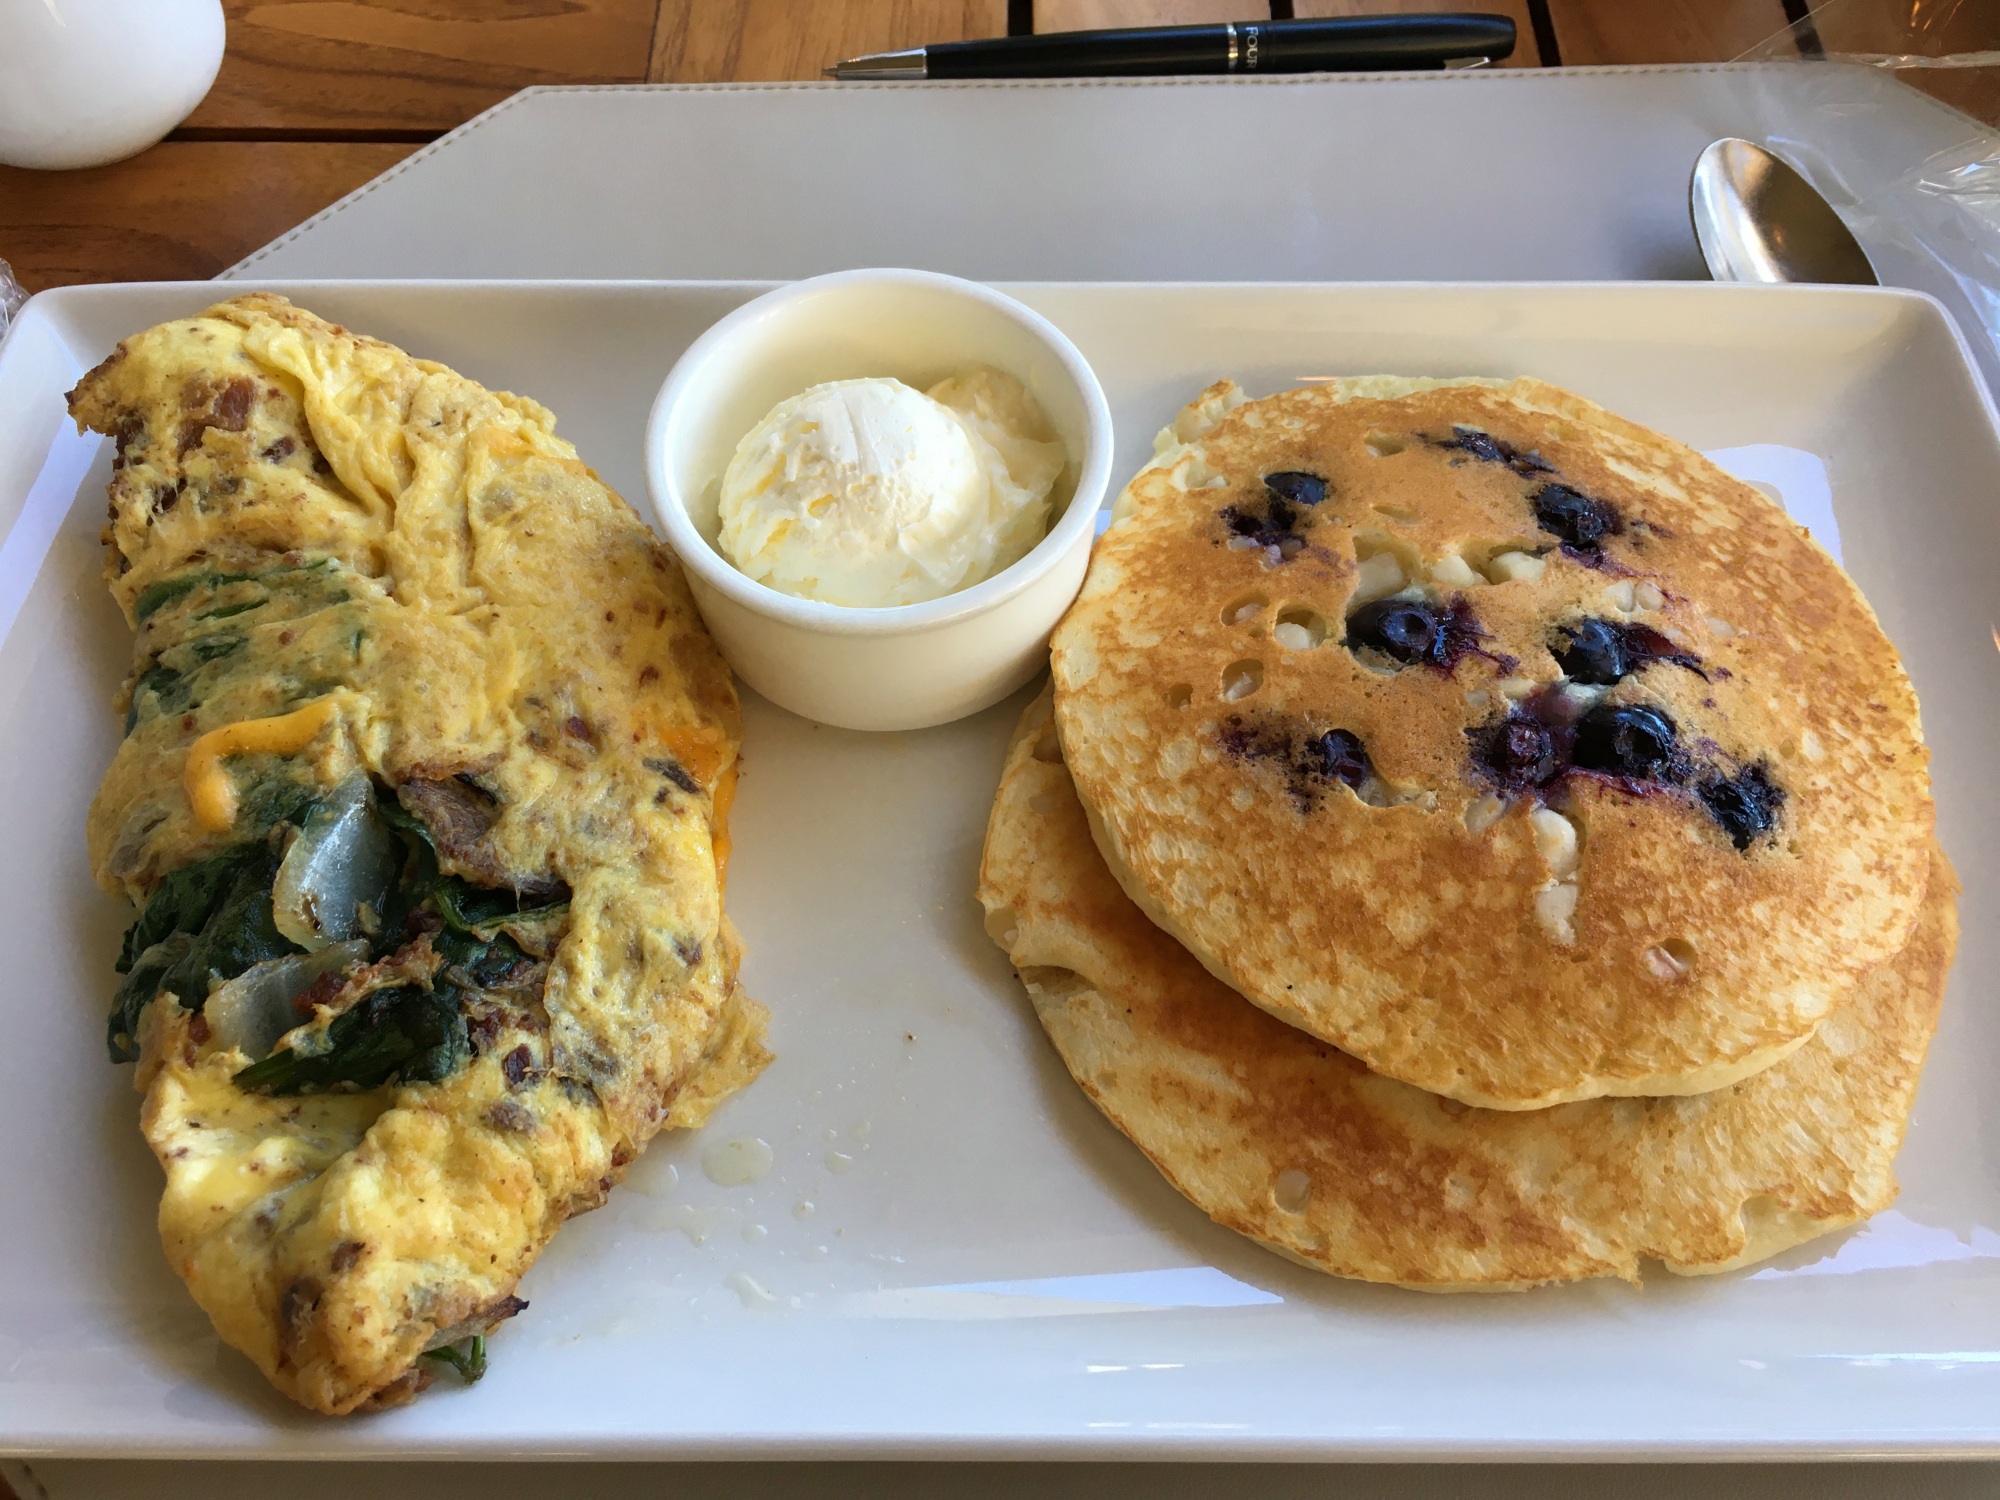 Four Seasons Maui Breakfast: Omelet and Blueberry Macadamia Nut Pancakes Cooked to Order